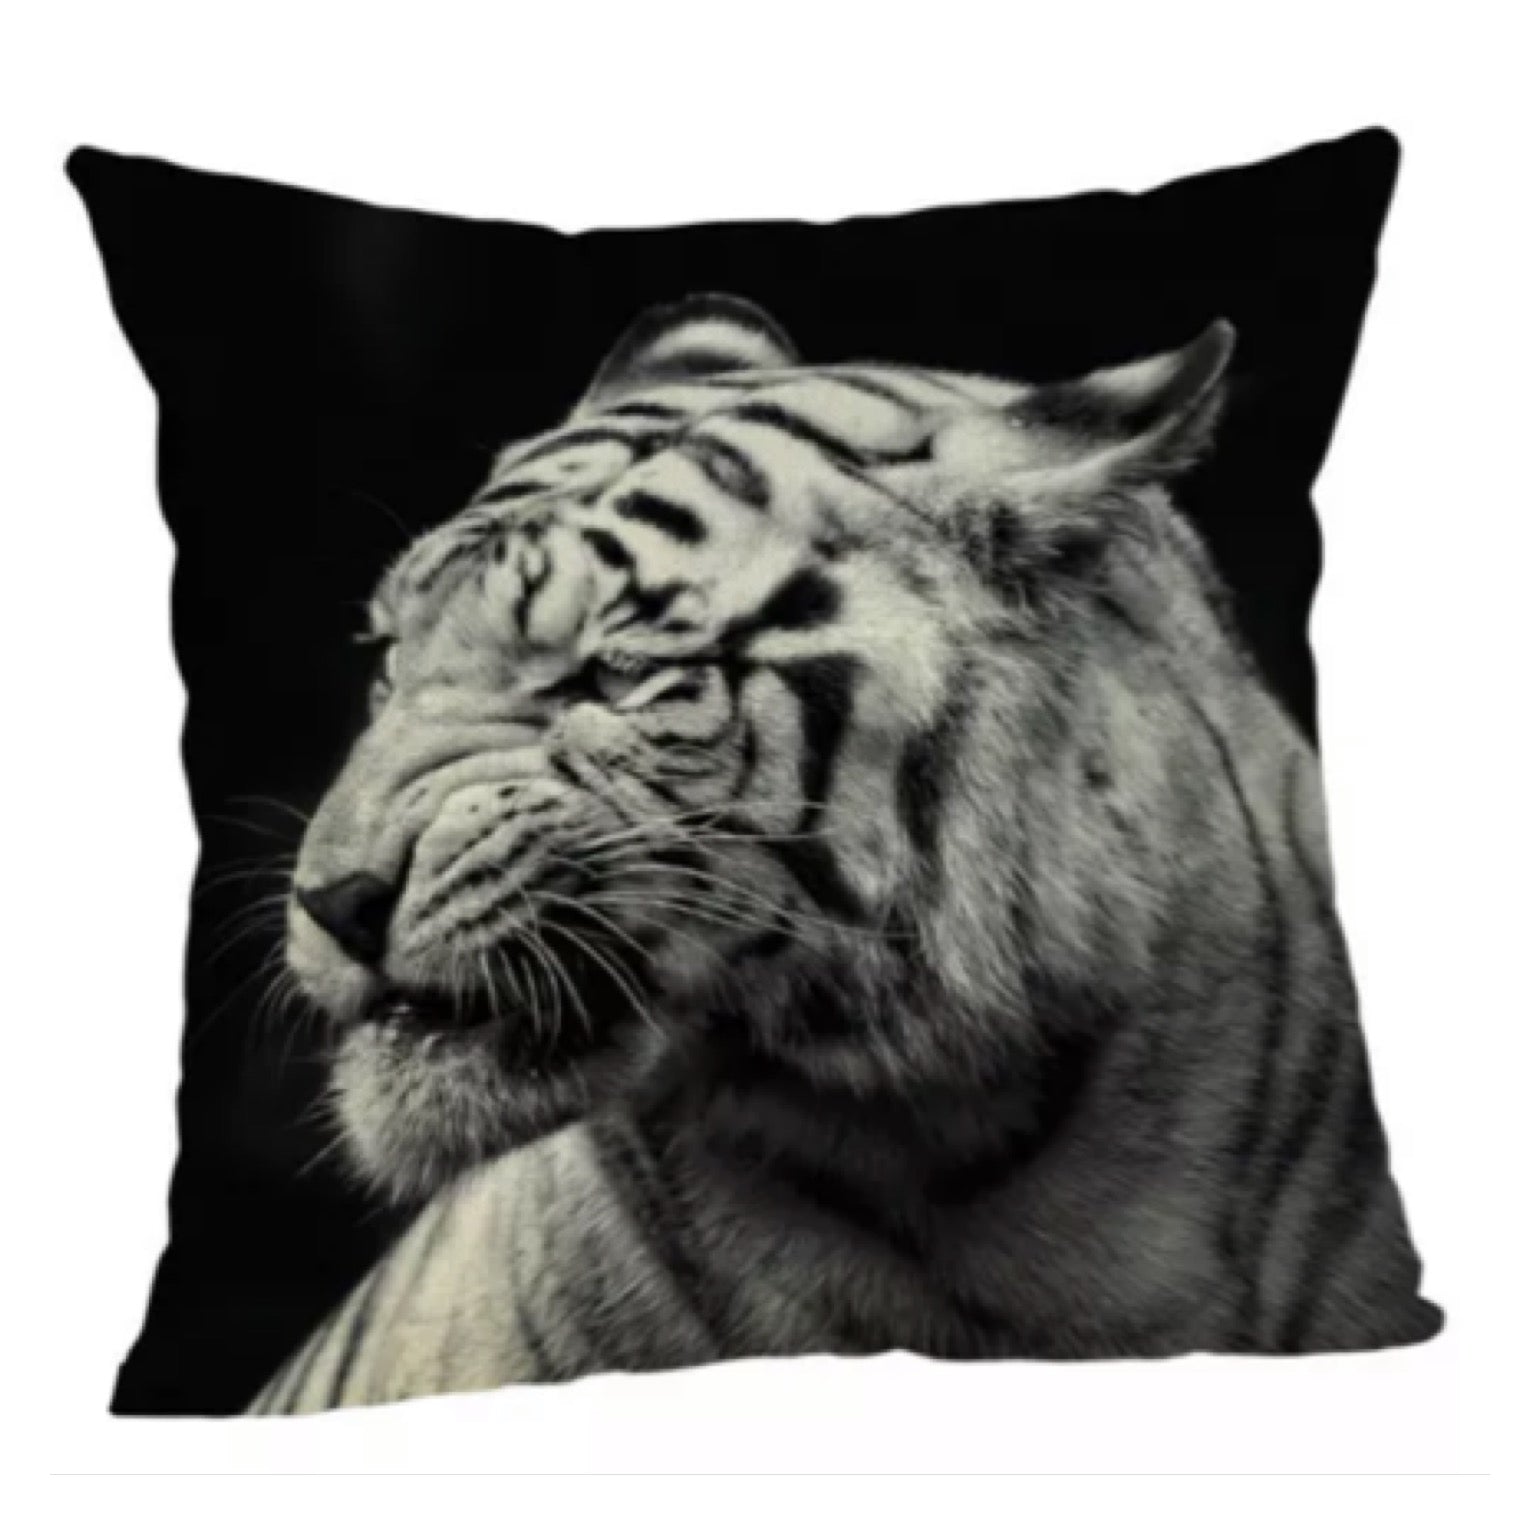 Cushion Cover Tiger Wild White Wonder - The Renmy Store Homewares & Gifts 